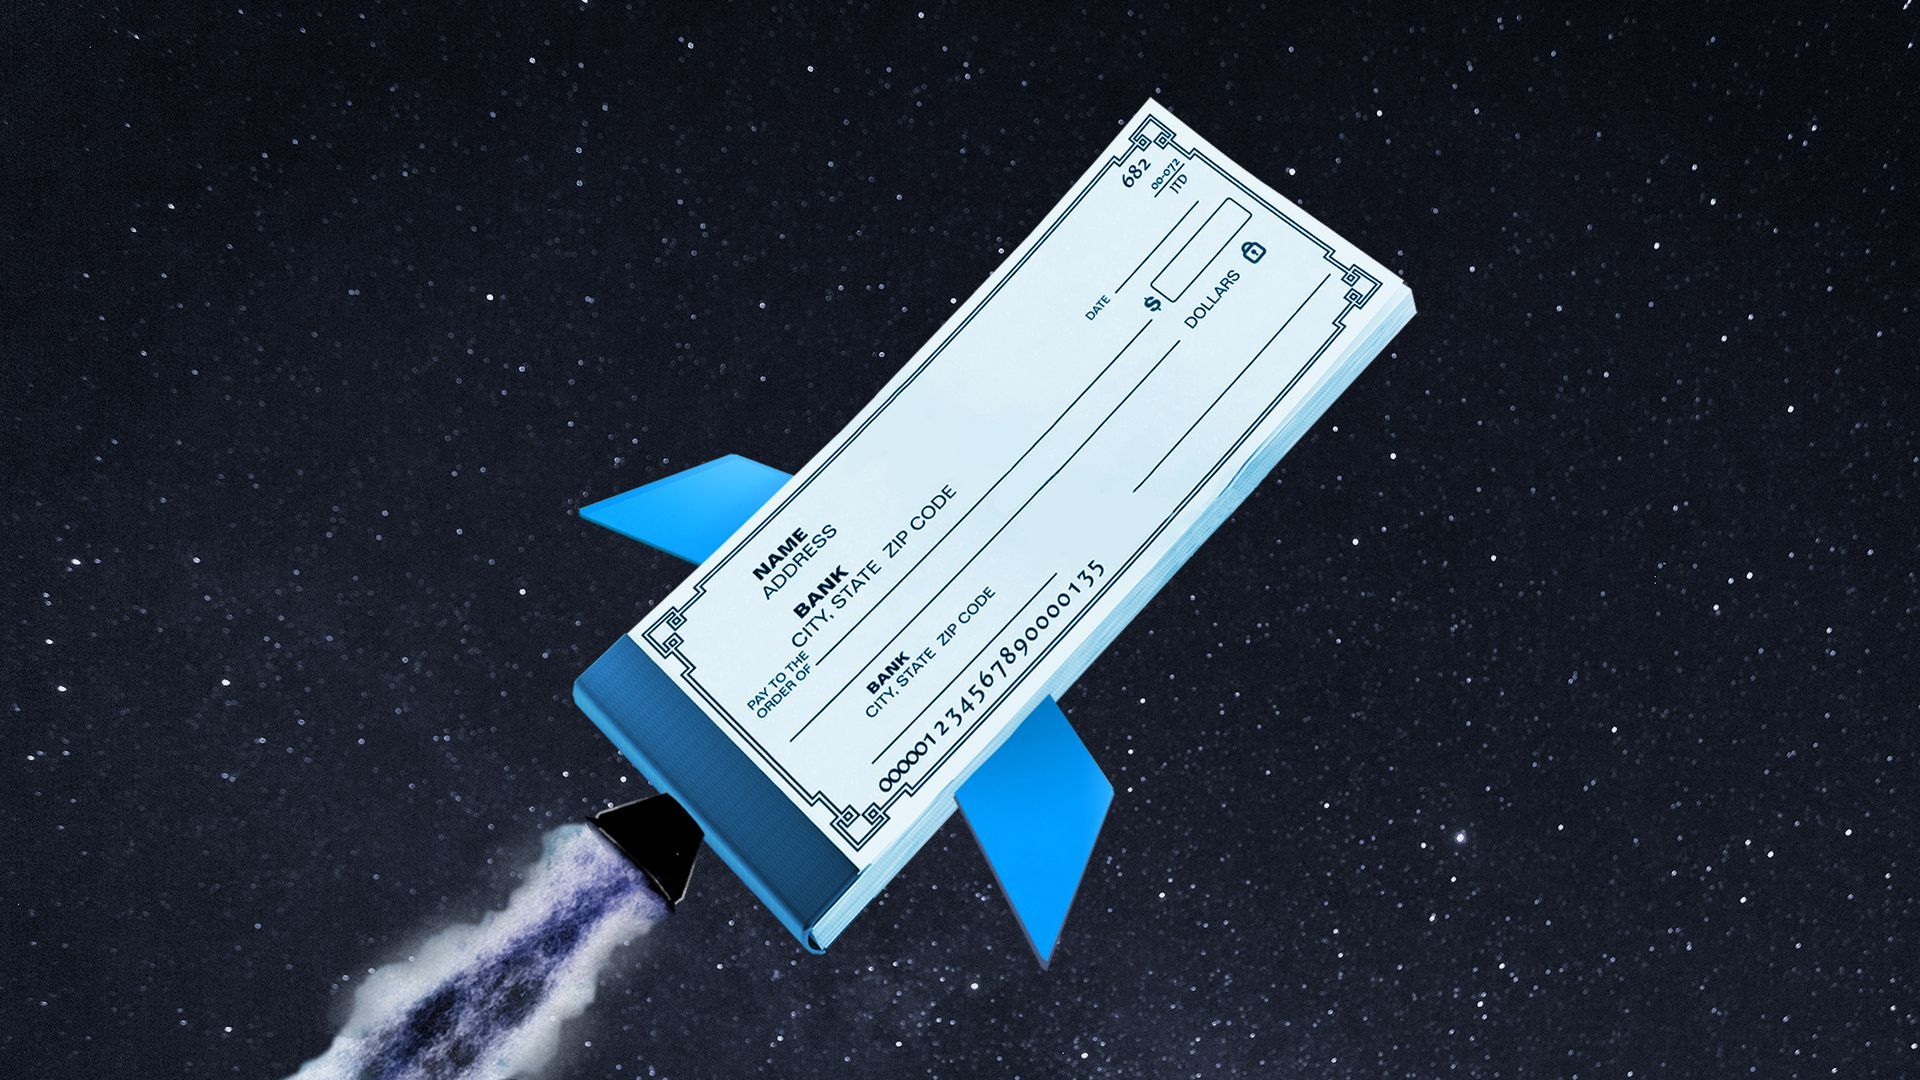 Illustration of a spaceship made from a checkbook flying through outer space